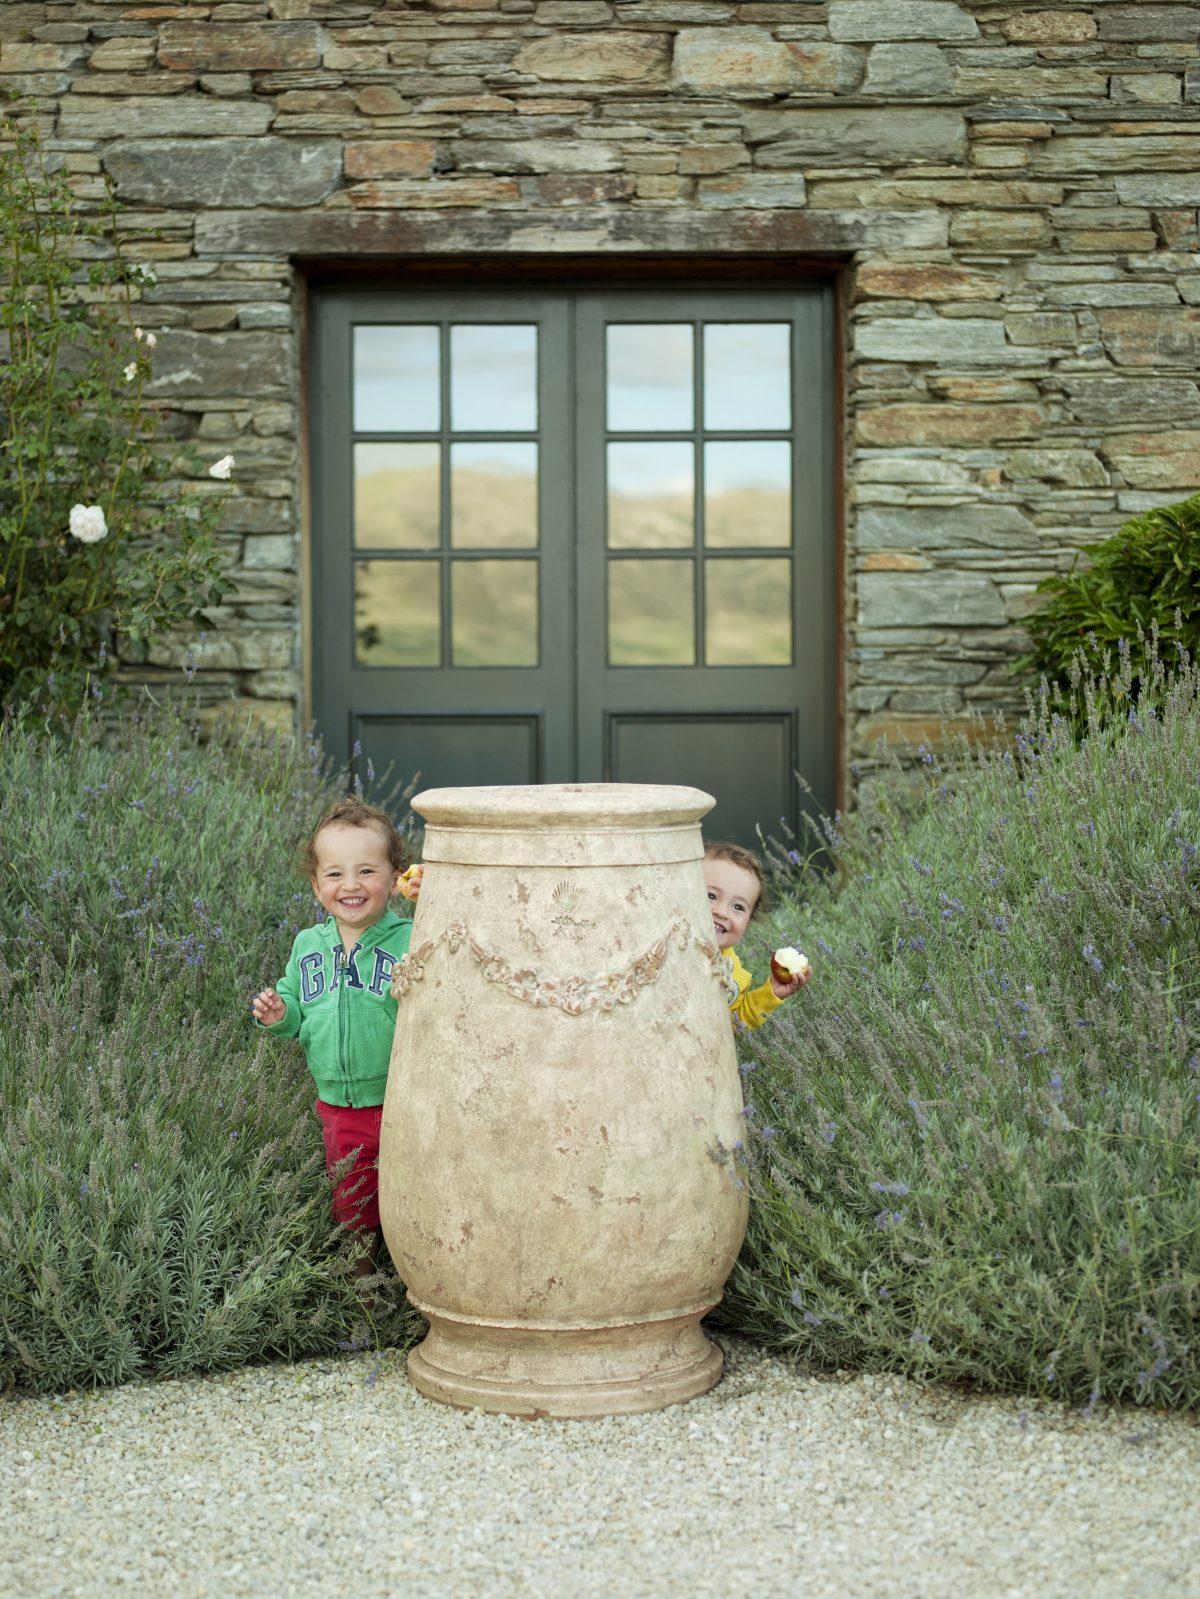 Fourbet's 3-year-old twins, Mortimer (L) and Augustin, hide behind one of his olive jars. (Rachael McKenna)